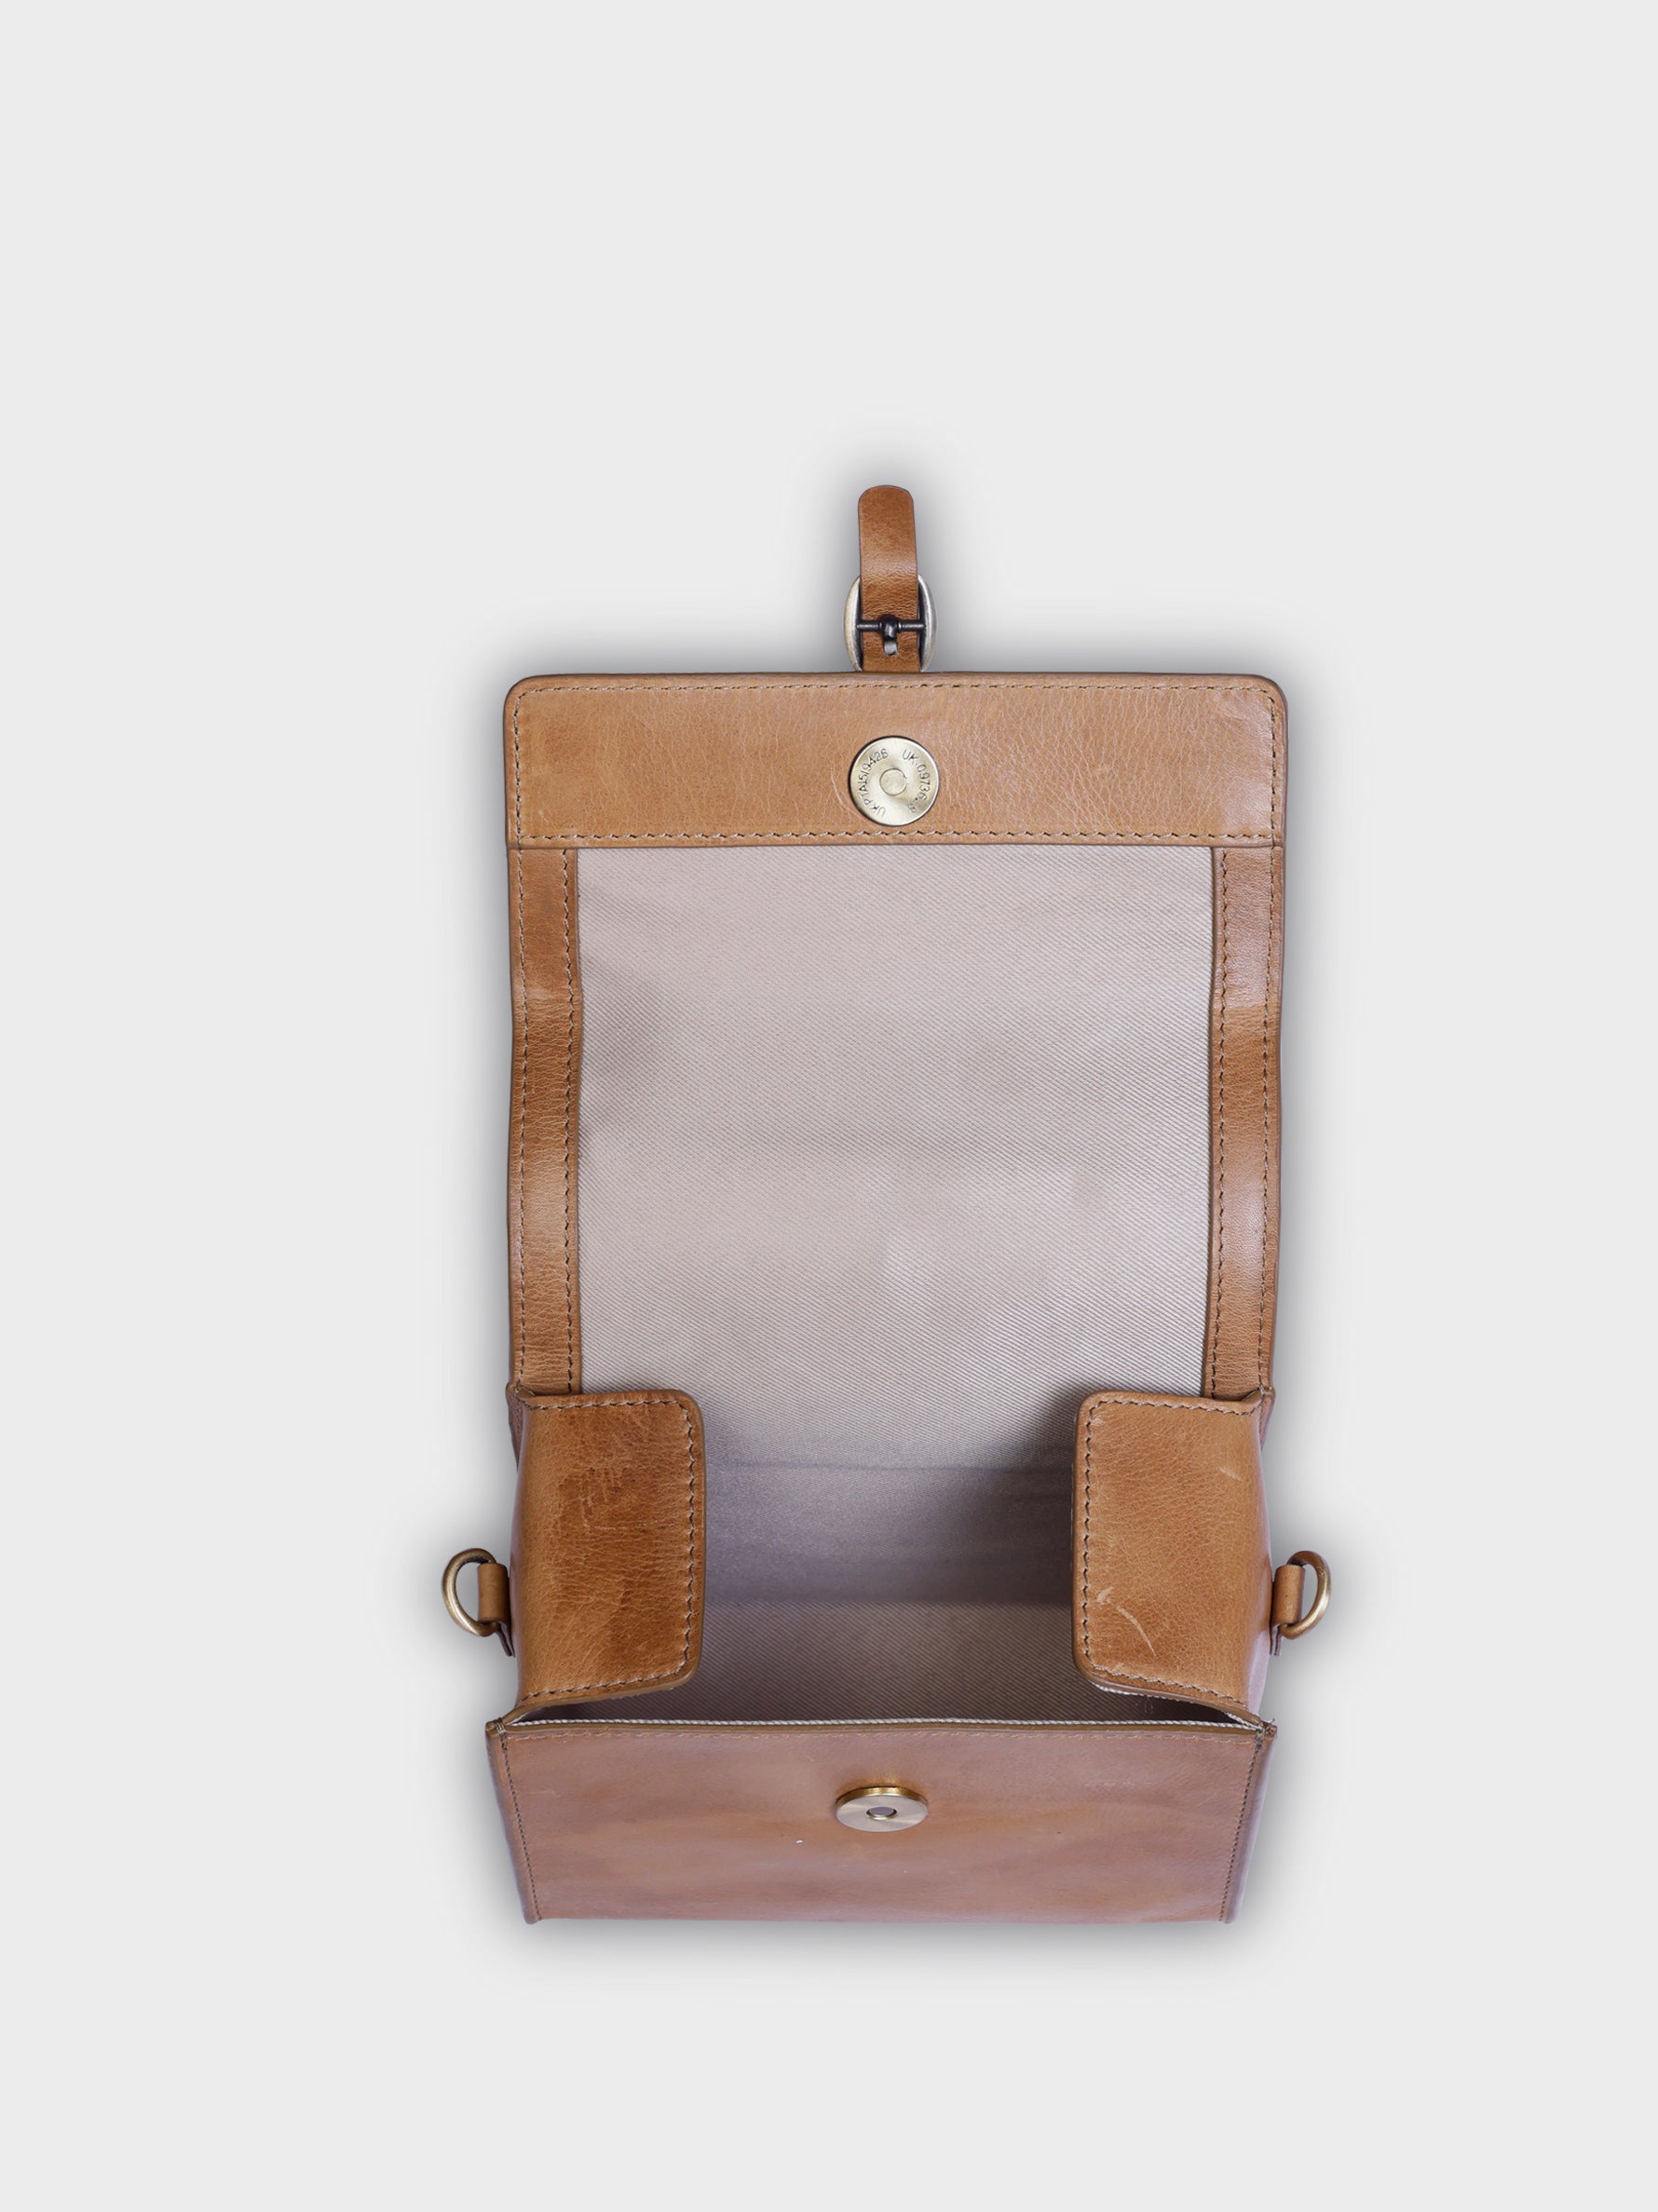 Handcrafted Genuine Vegetable Tanned Leather Piccolo Box Bag Tuscany Tan for Women Tan & Loom